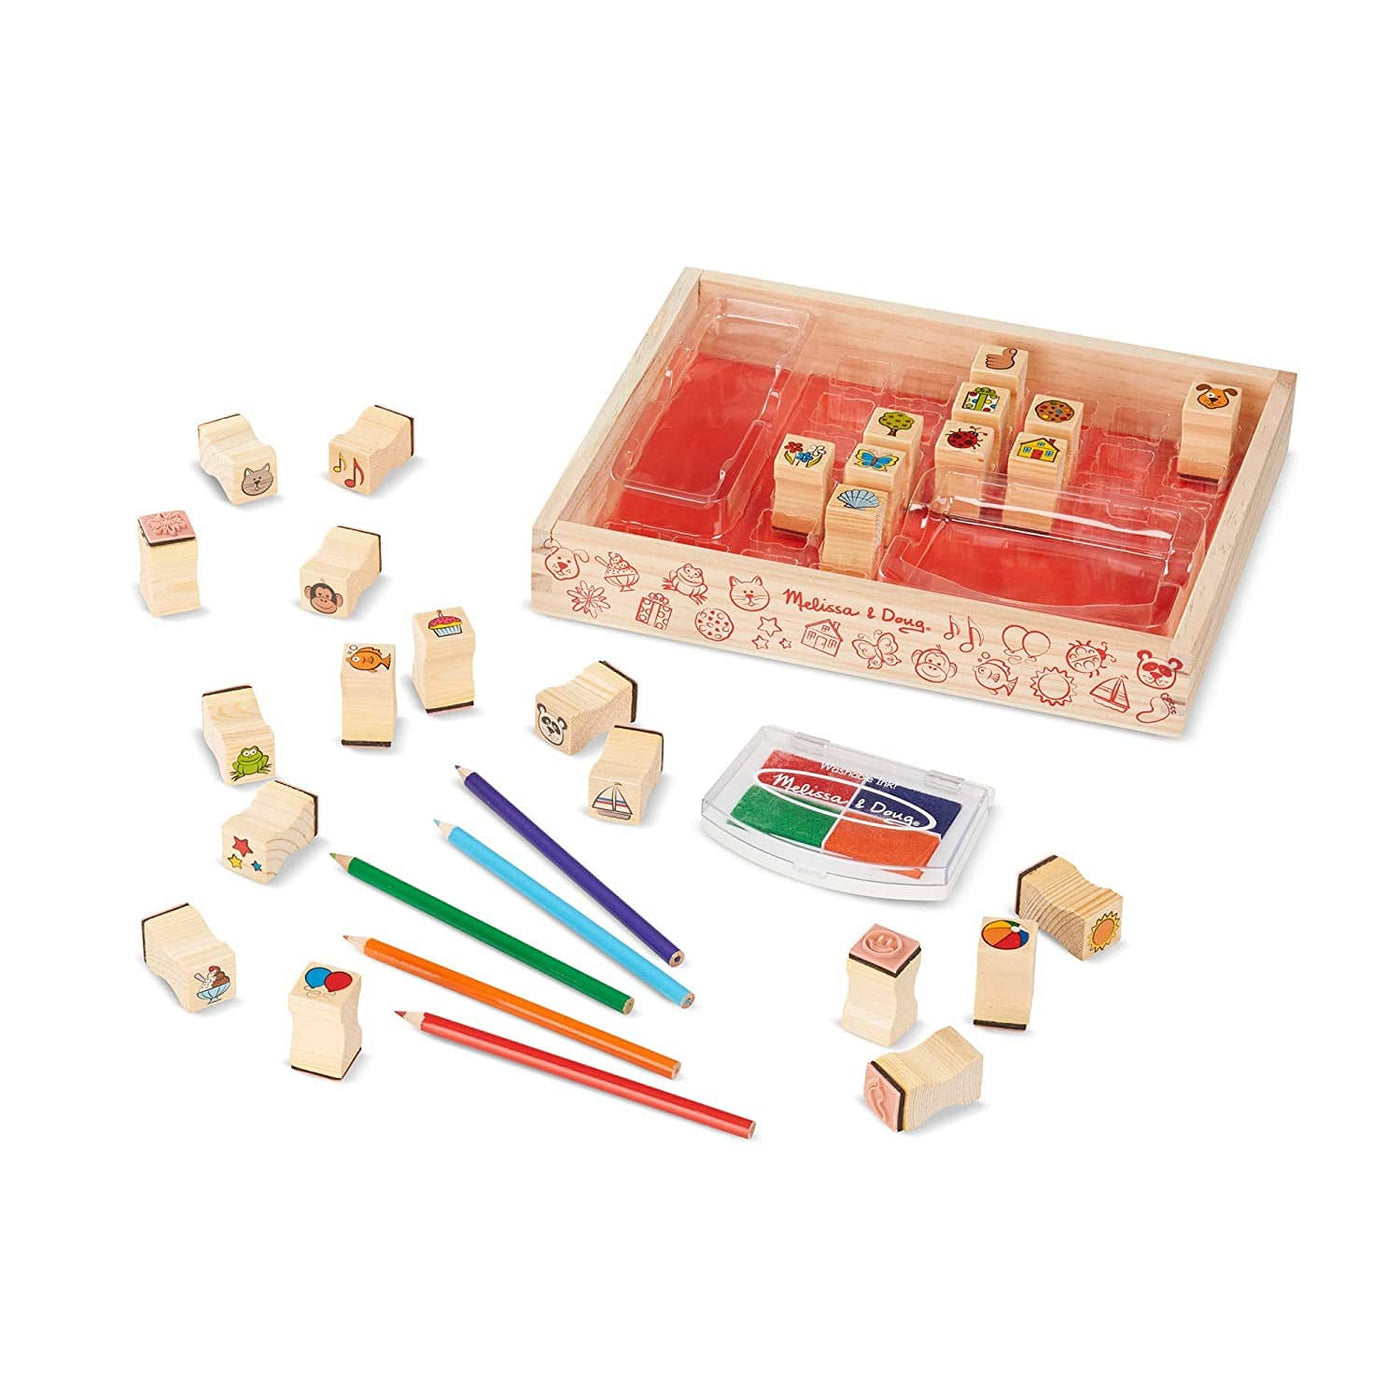 Wooden Favorite Things Stamp Set by Melissa & Doug, USA Toy